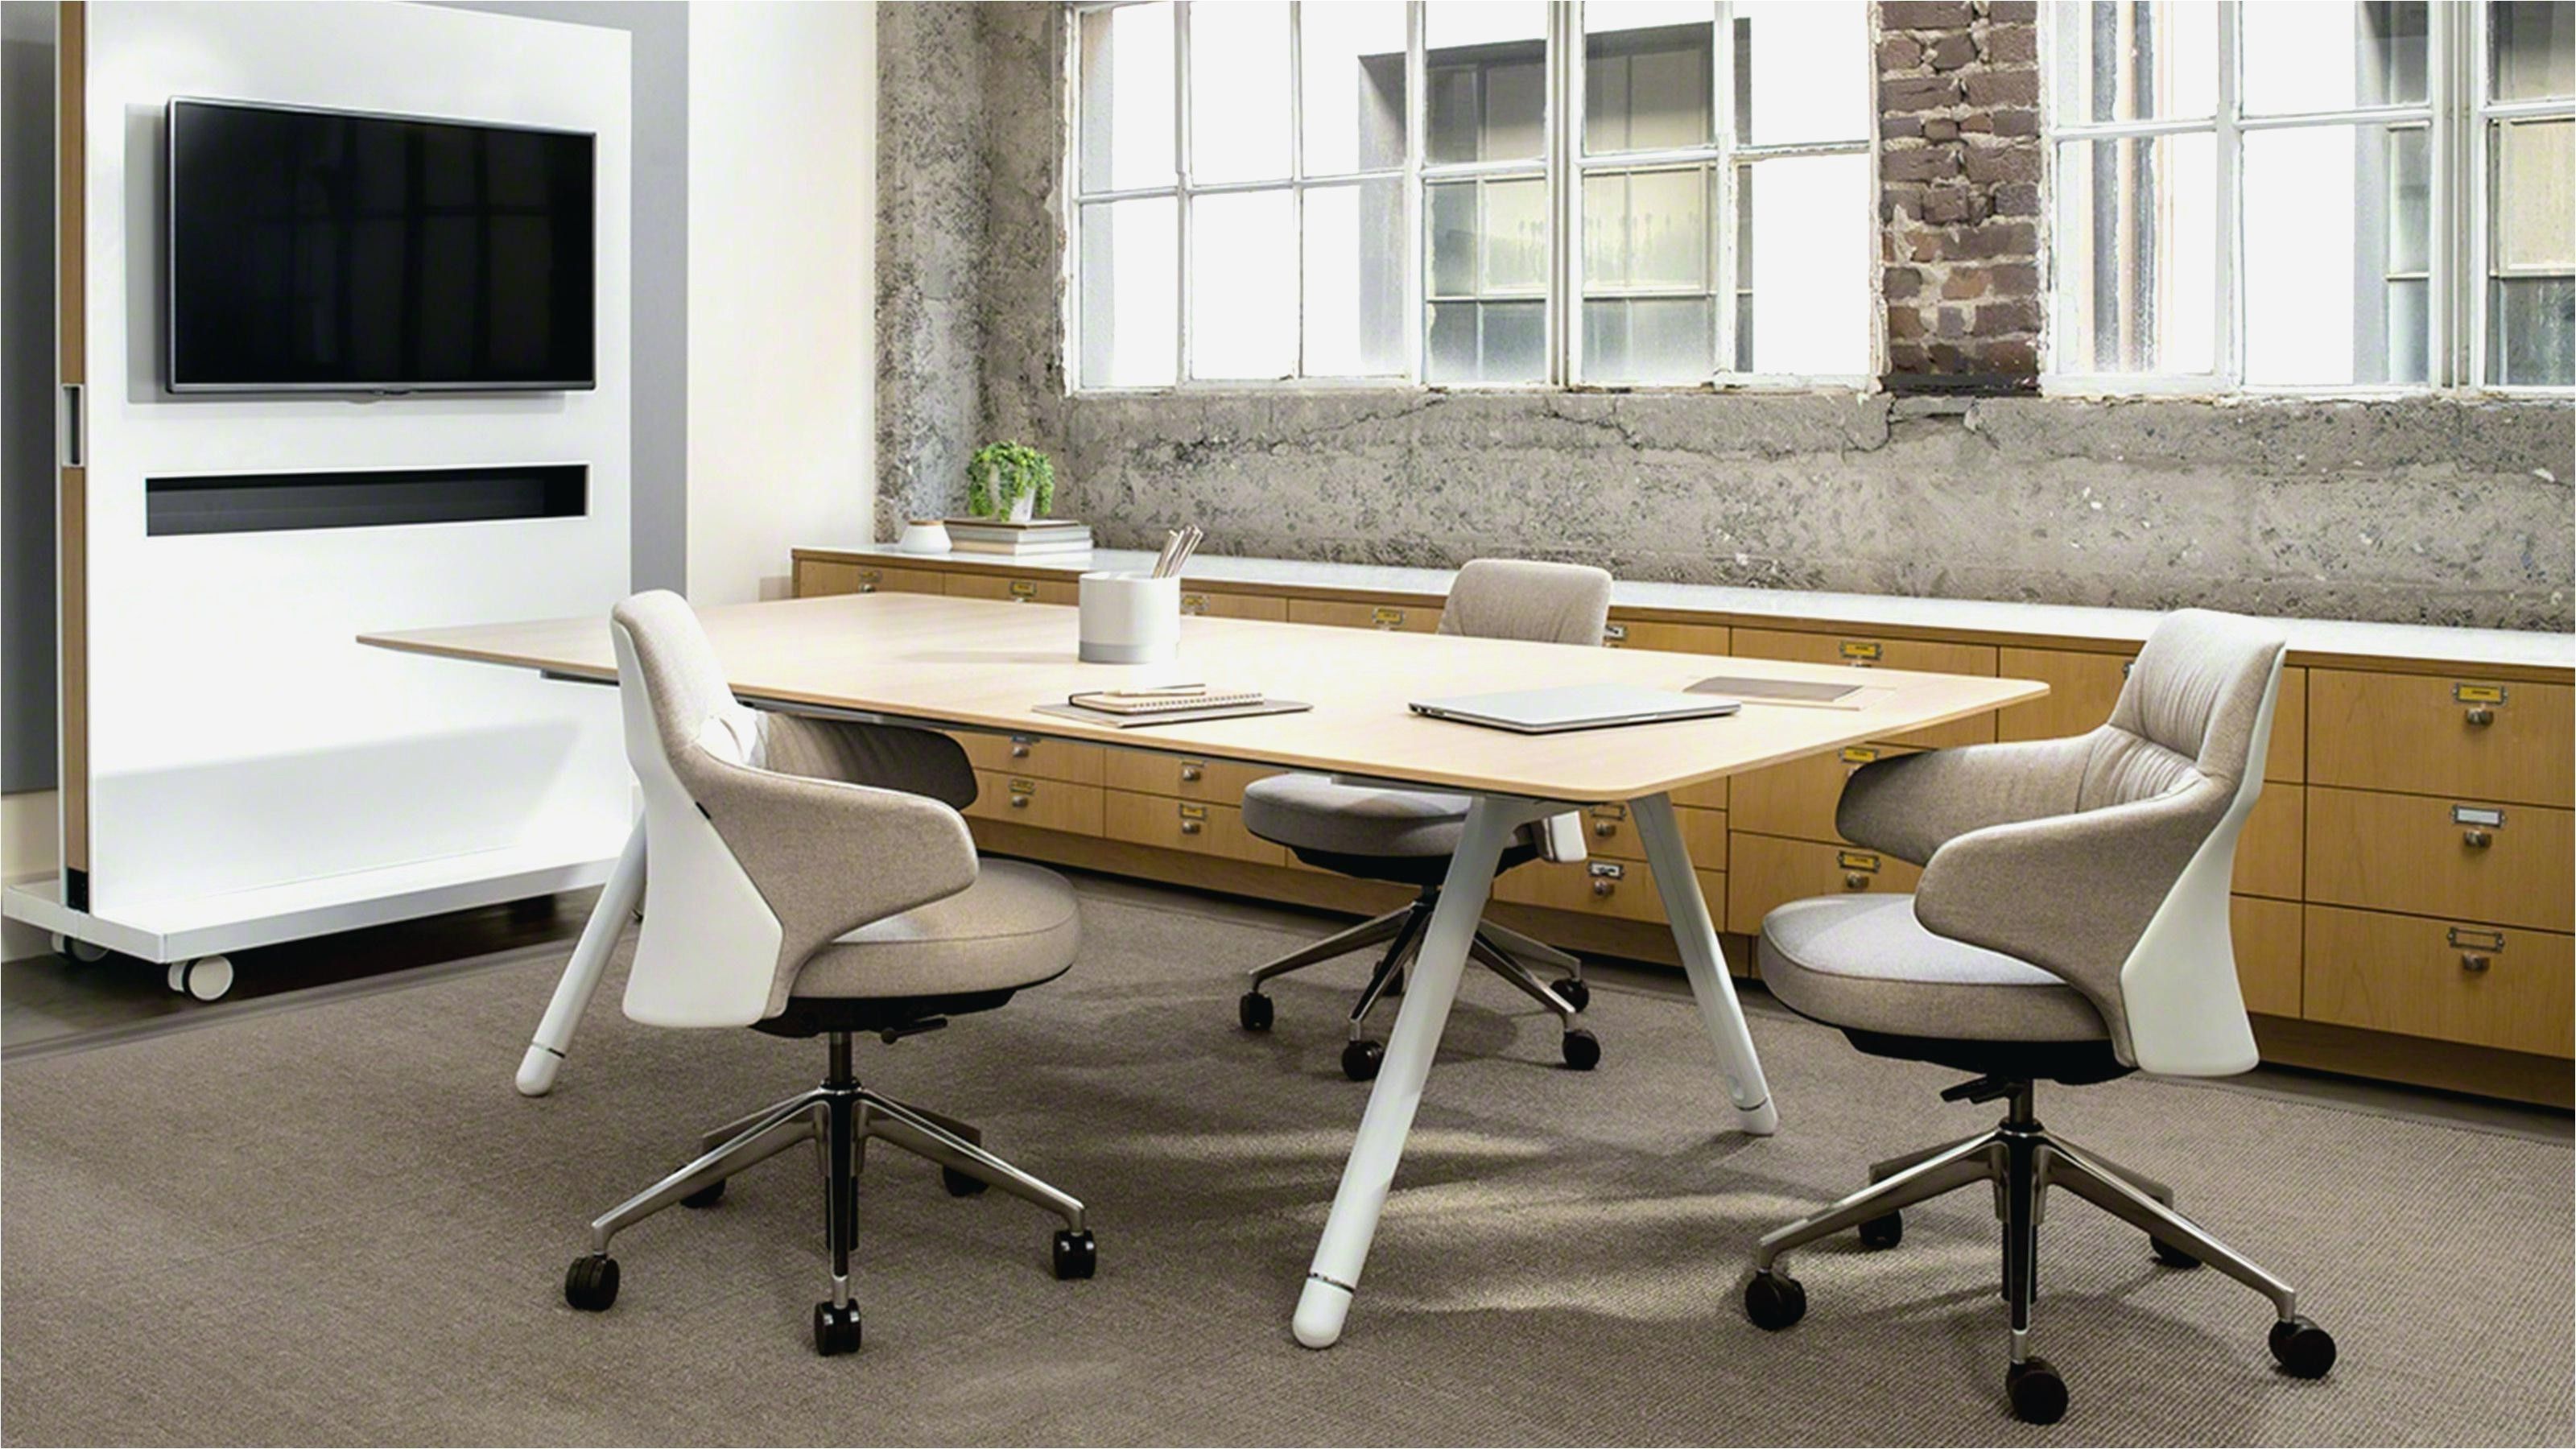 Most Recently Released German Executive Office Chairs With Regard To German Furniture Elegant Office Design German Office Chairs German (View 14 of 20)